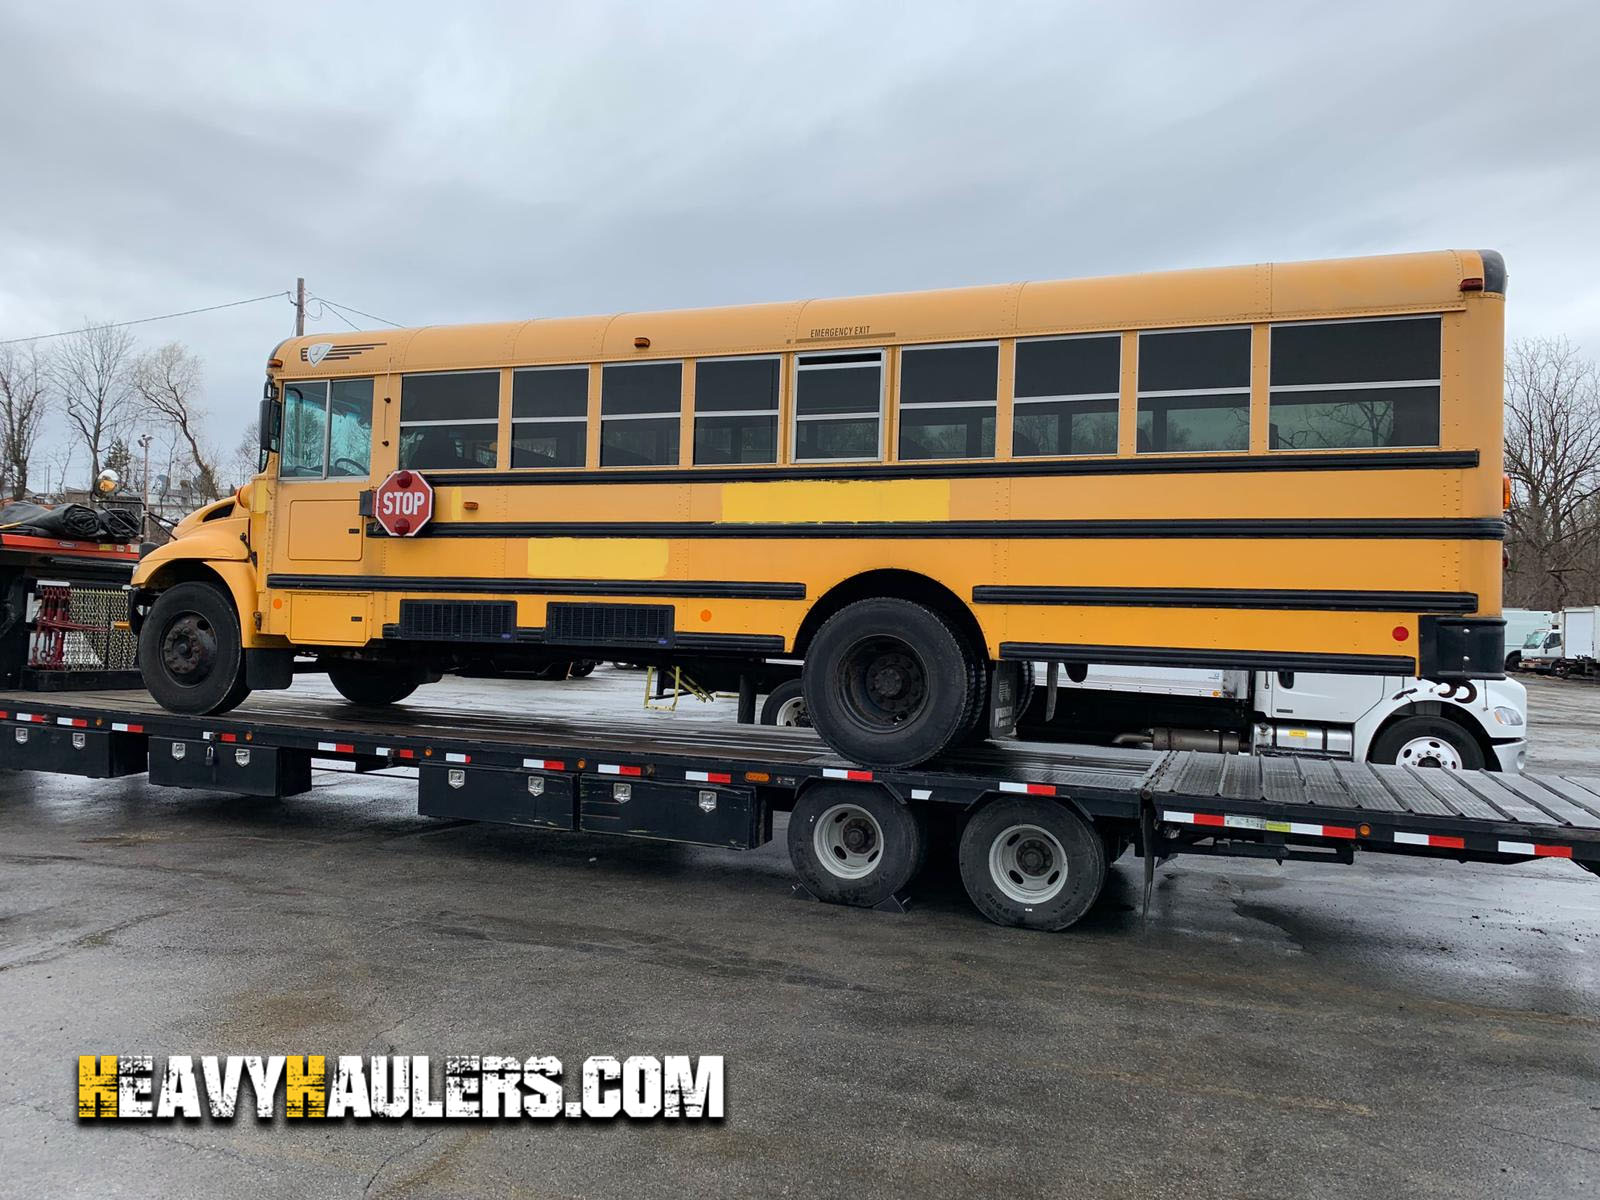 School bus being transported